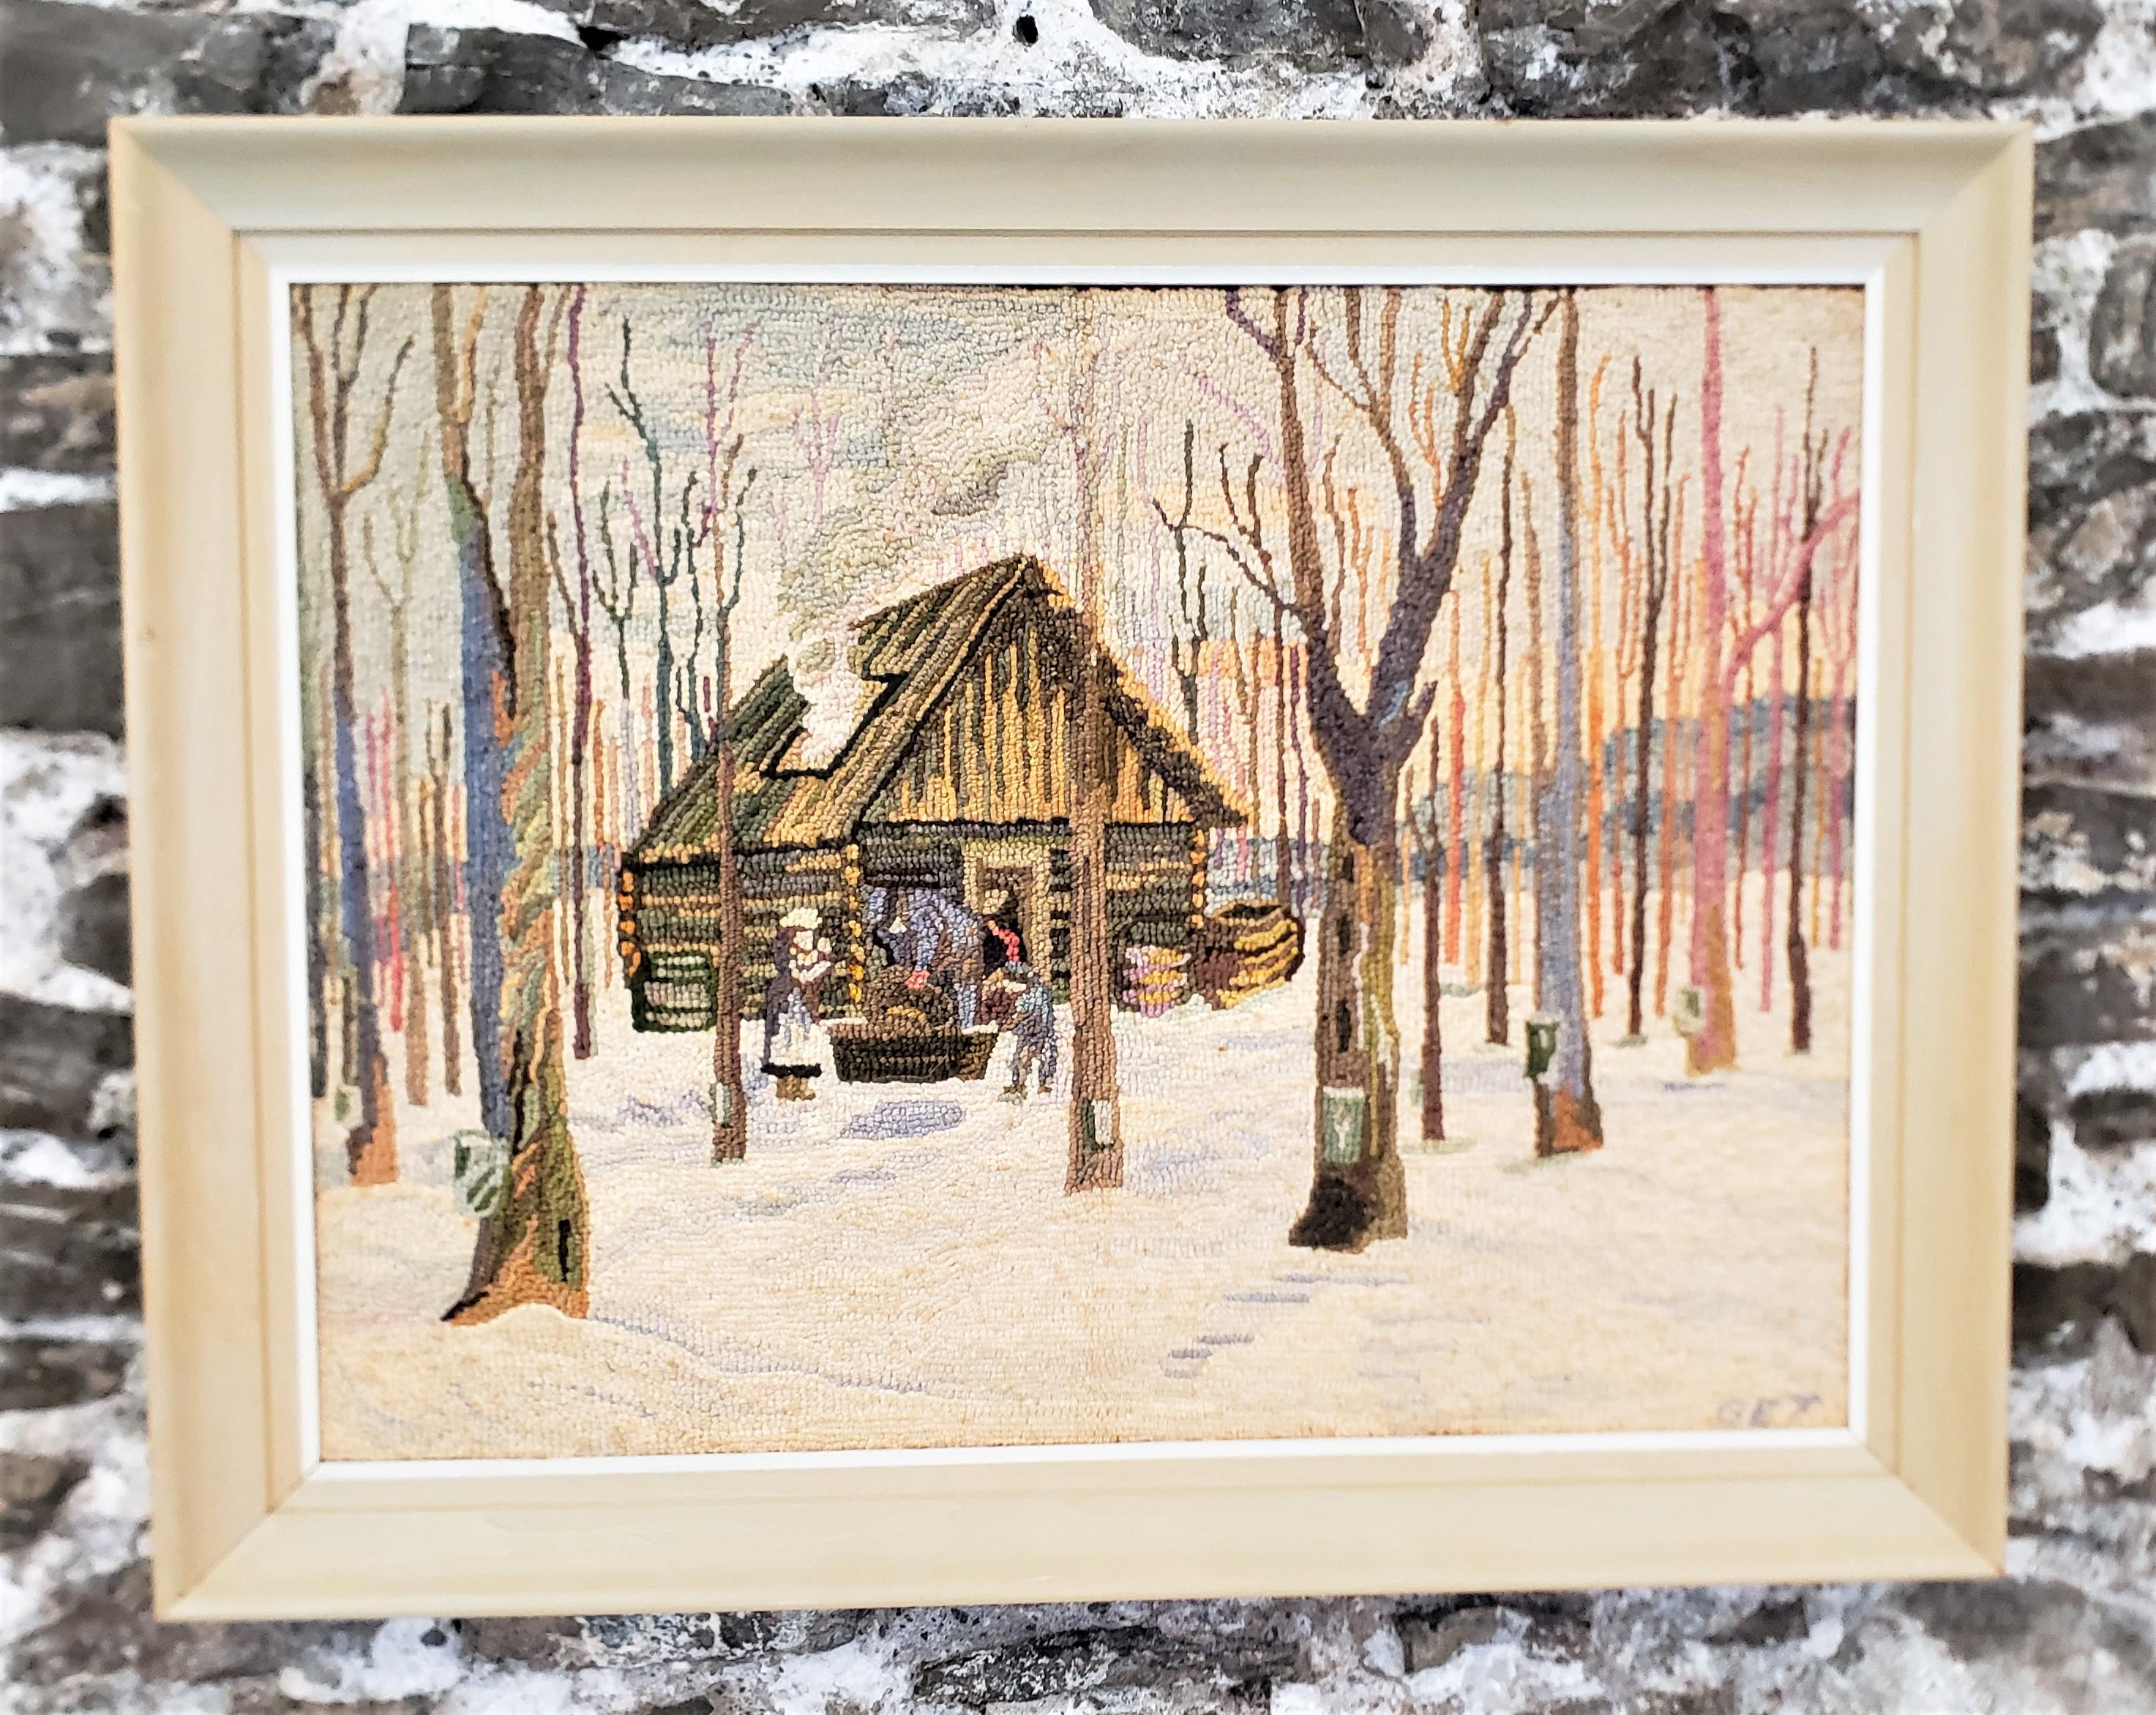 This framed hooked rug or mat was done by the well known artist George Edouard Tremblay of Quebec Canada in approximately 1940 in his period Folk Art style. The rug or mat is done with wool on burlap which has been mounted on masonite board and